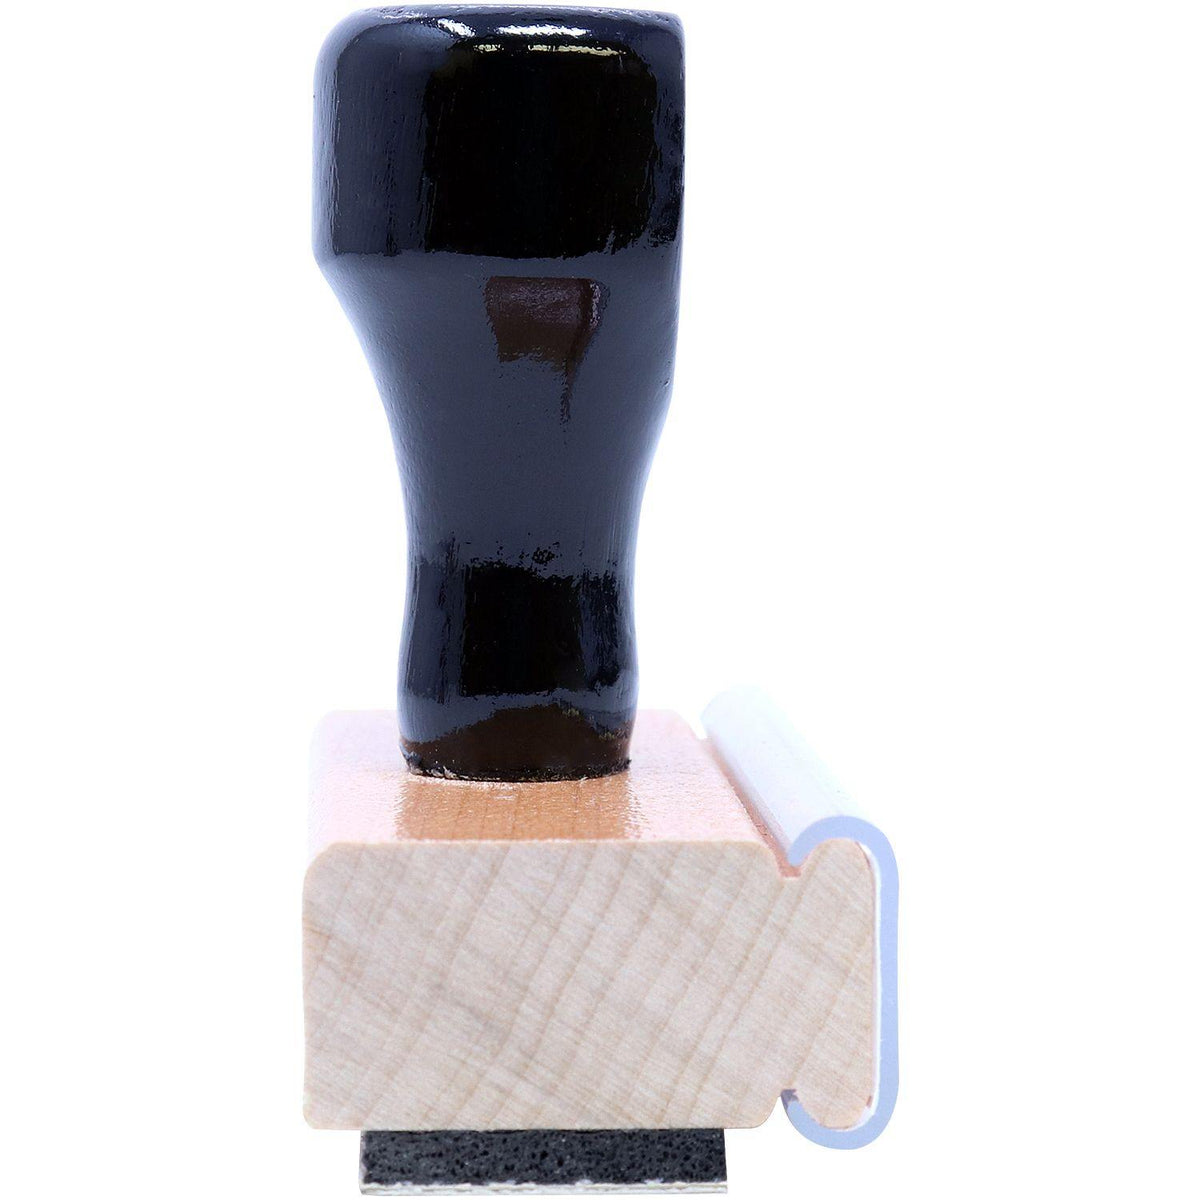 Large Times First Class Mail Rubber Stamp - Engineer Seal Stamps - Brand_Acorn, Impression Size_Large, Stamp Type_Regular Stamp, Type of Use_Postal &amp; Mailing